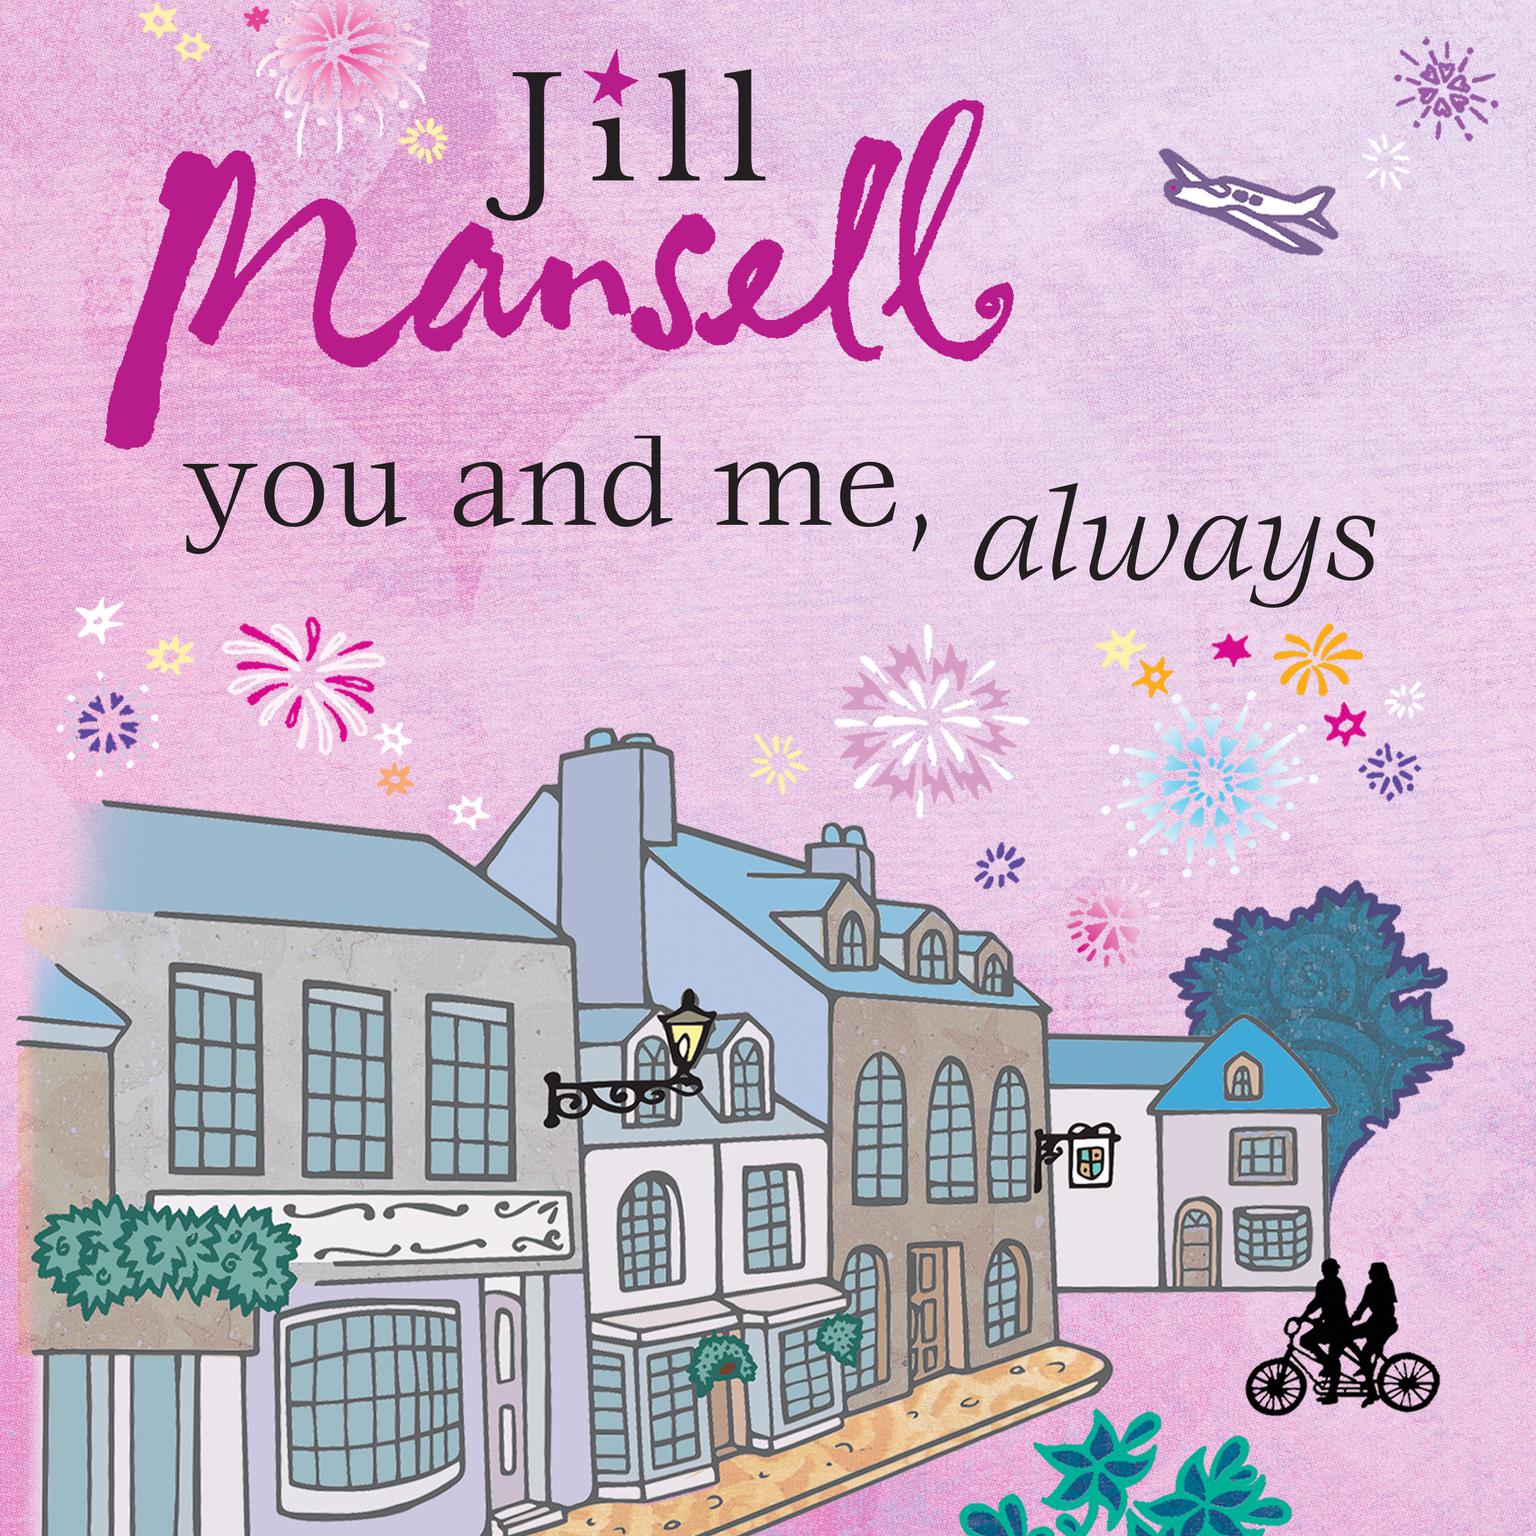 You And Me, Always Audiobook, by Jill Mansell